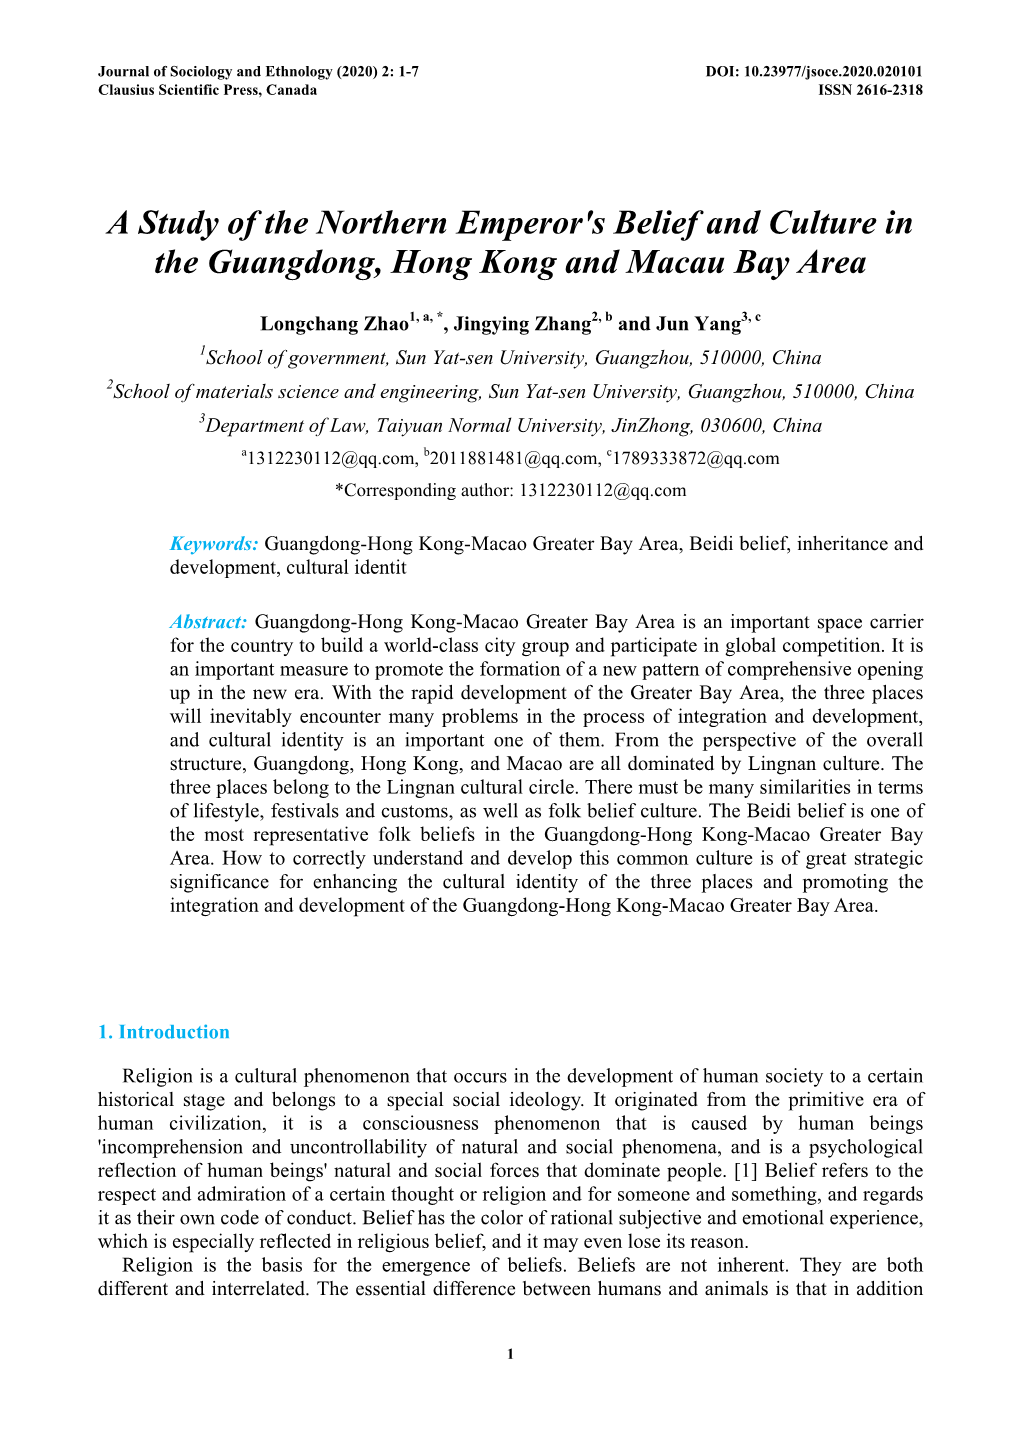 A Study of the Northern Emperor's Belief and Culture in the Guangdong, Hong Kong and Macau Bay Area